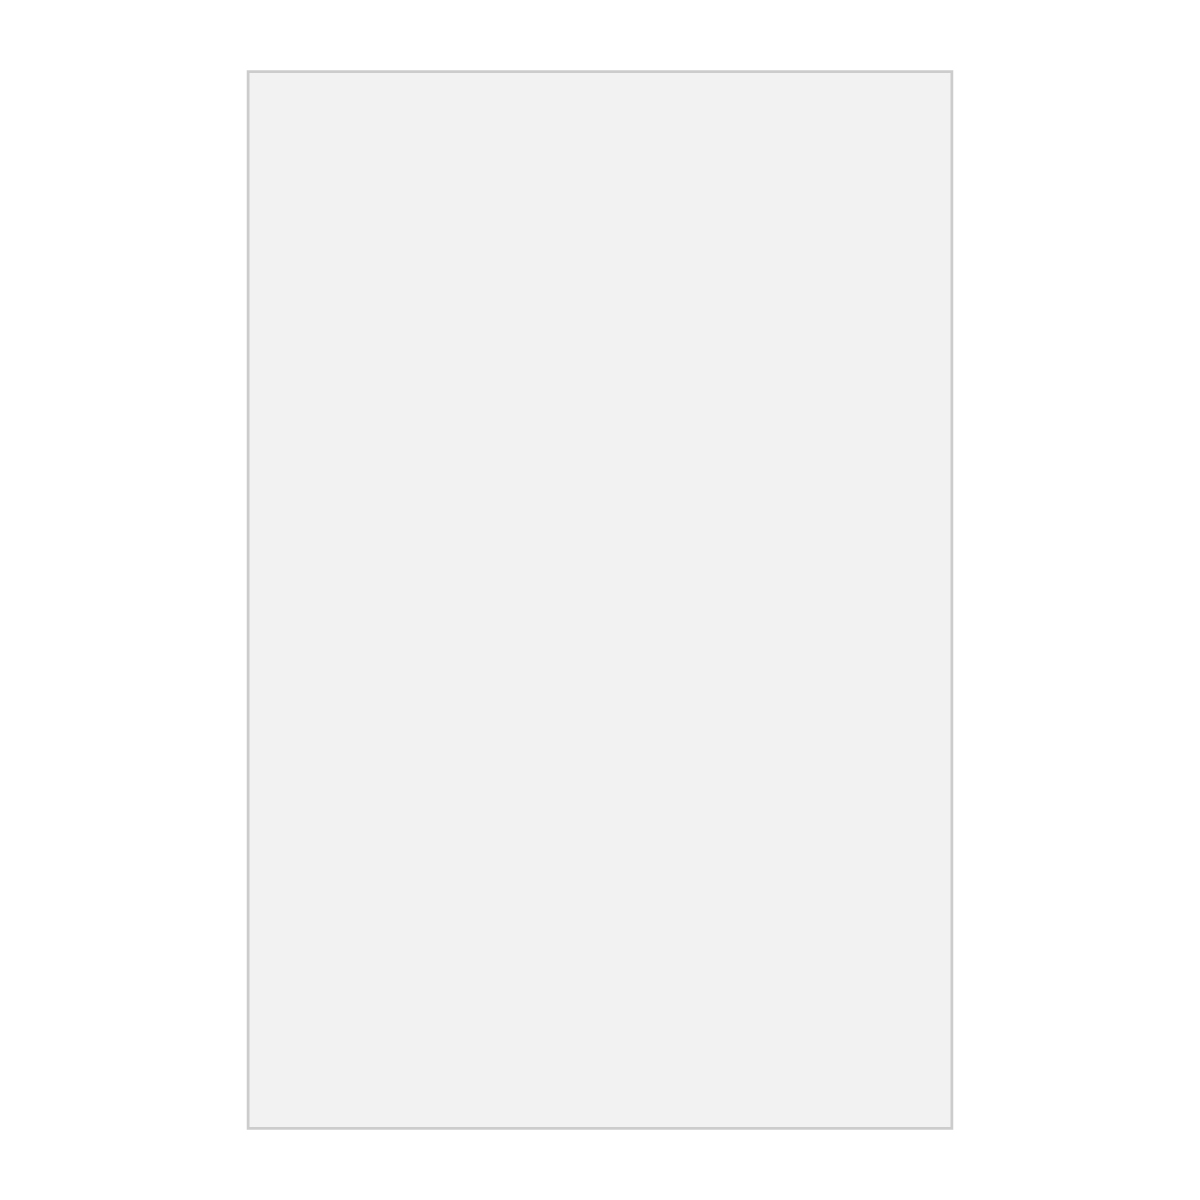 White 4" x 6" Adhesive Sticky Notepad - 25 Sheets